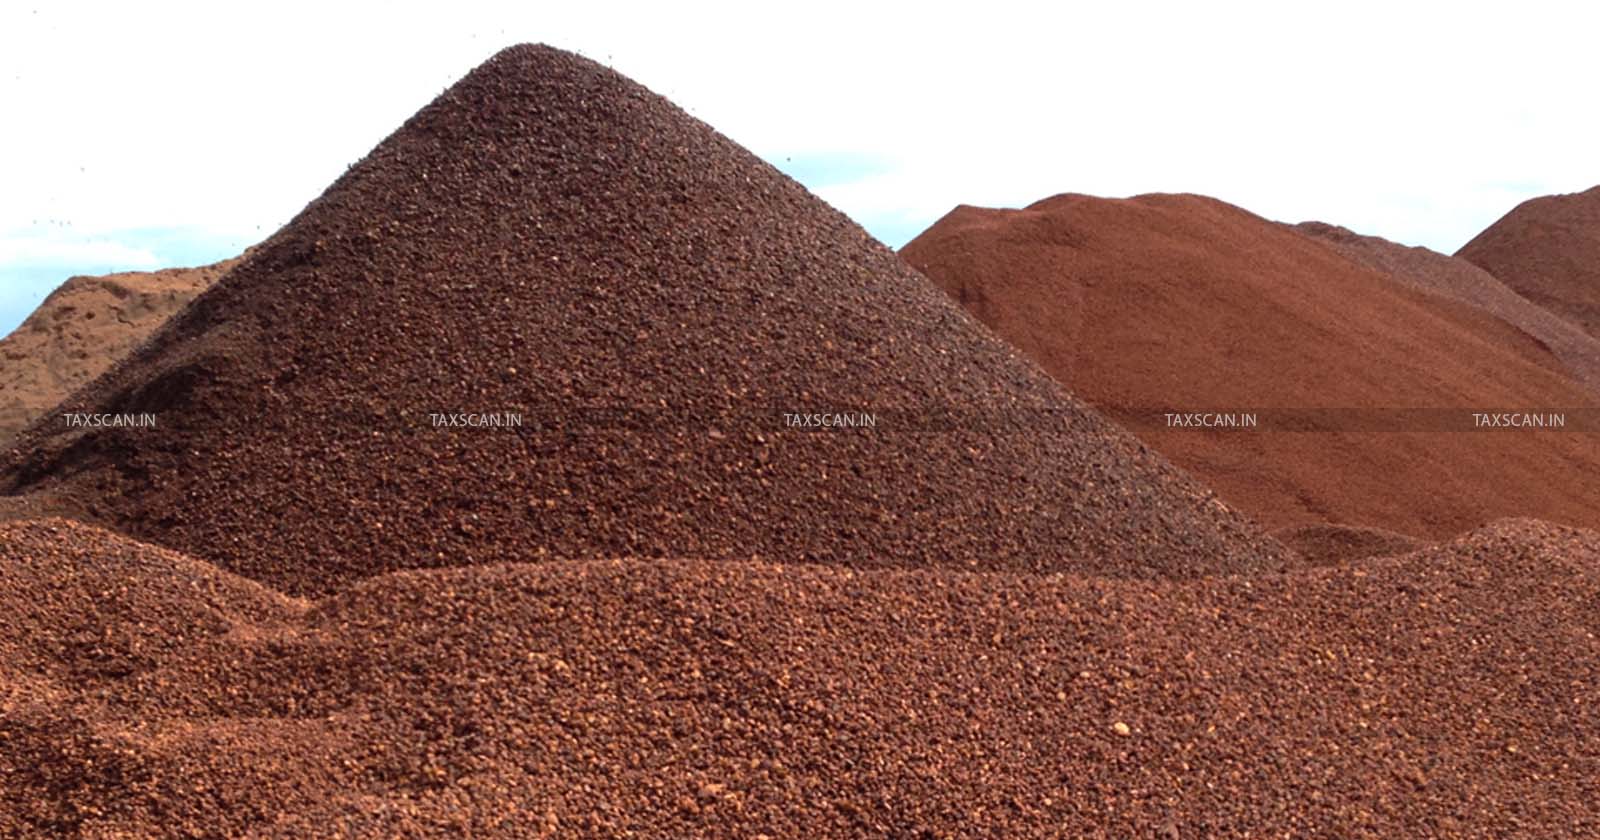 Iron ore fines - payment of Customs Duty - CESTAT allows Refund Claim - Refund Claim - CESTAT - TAXSCAN